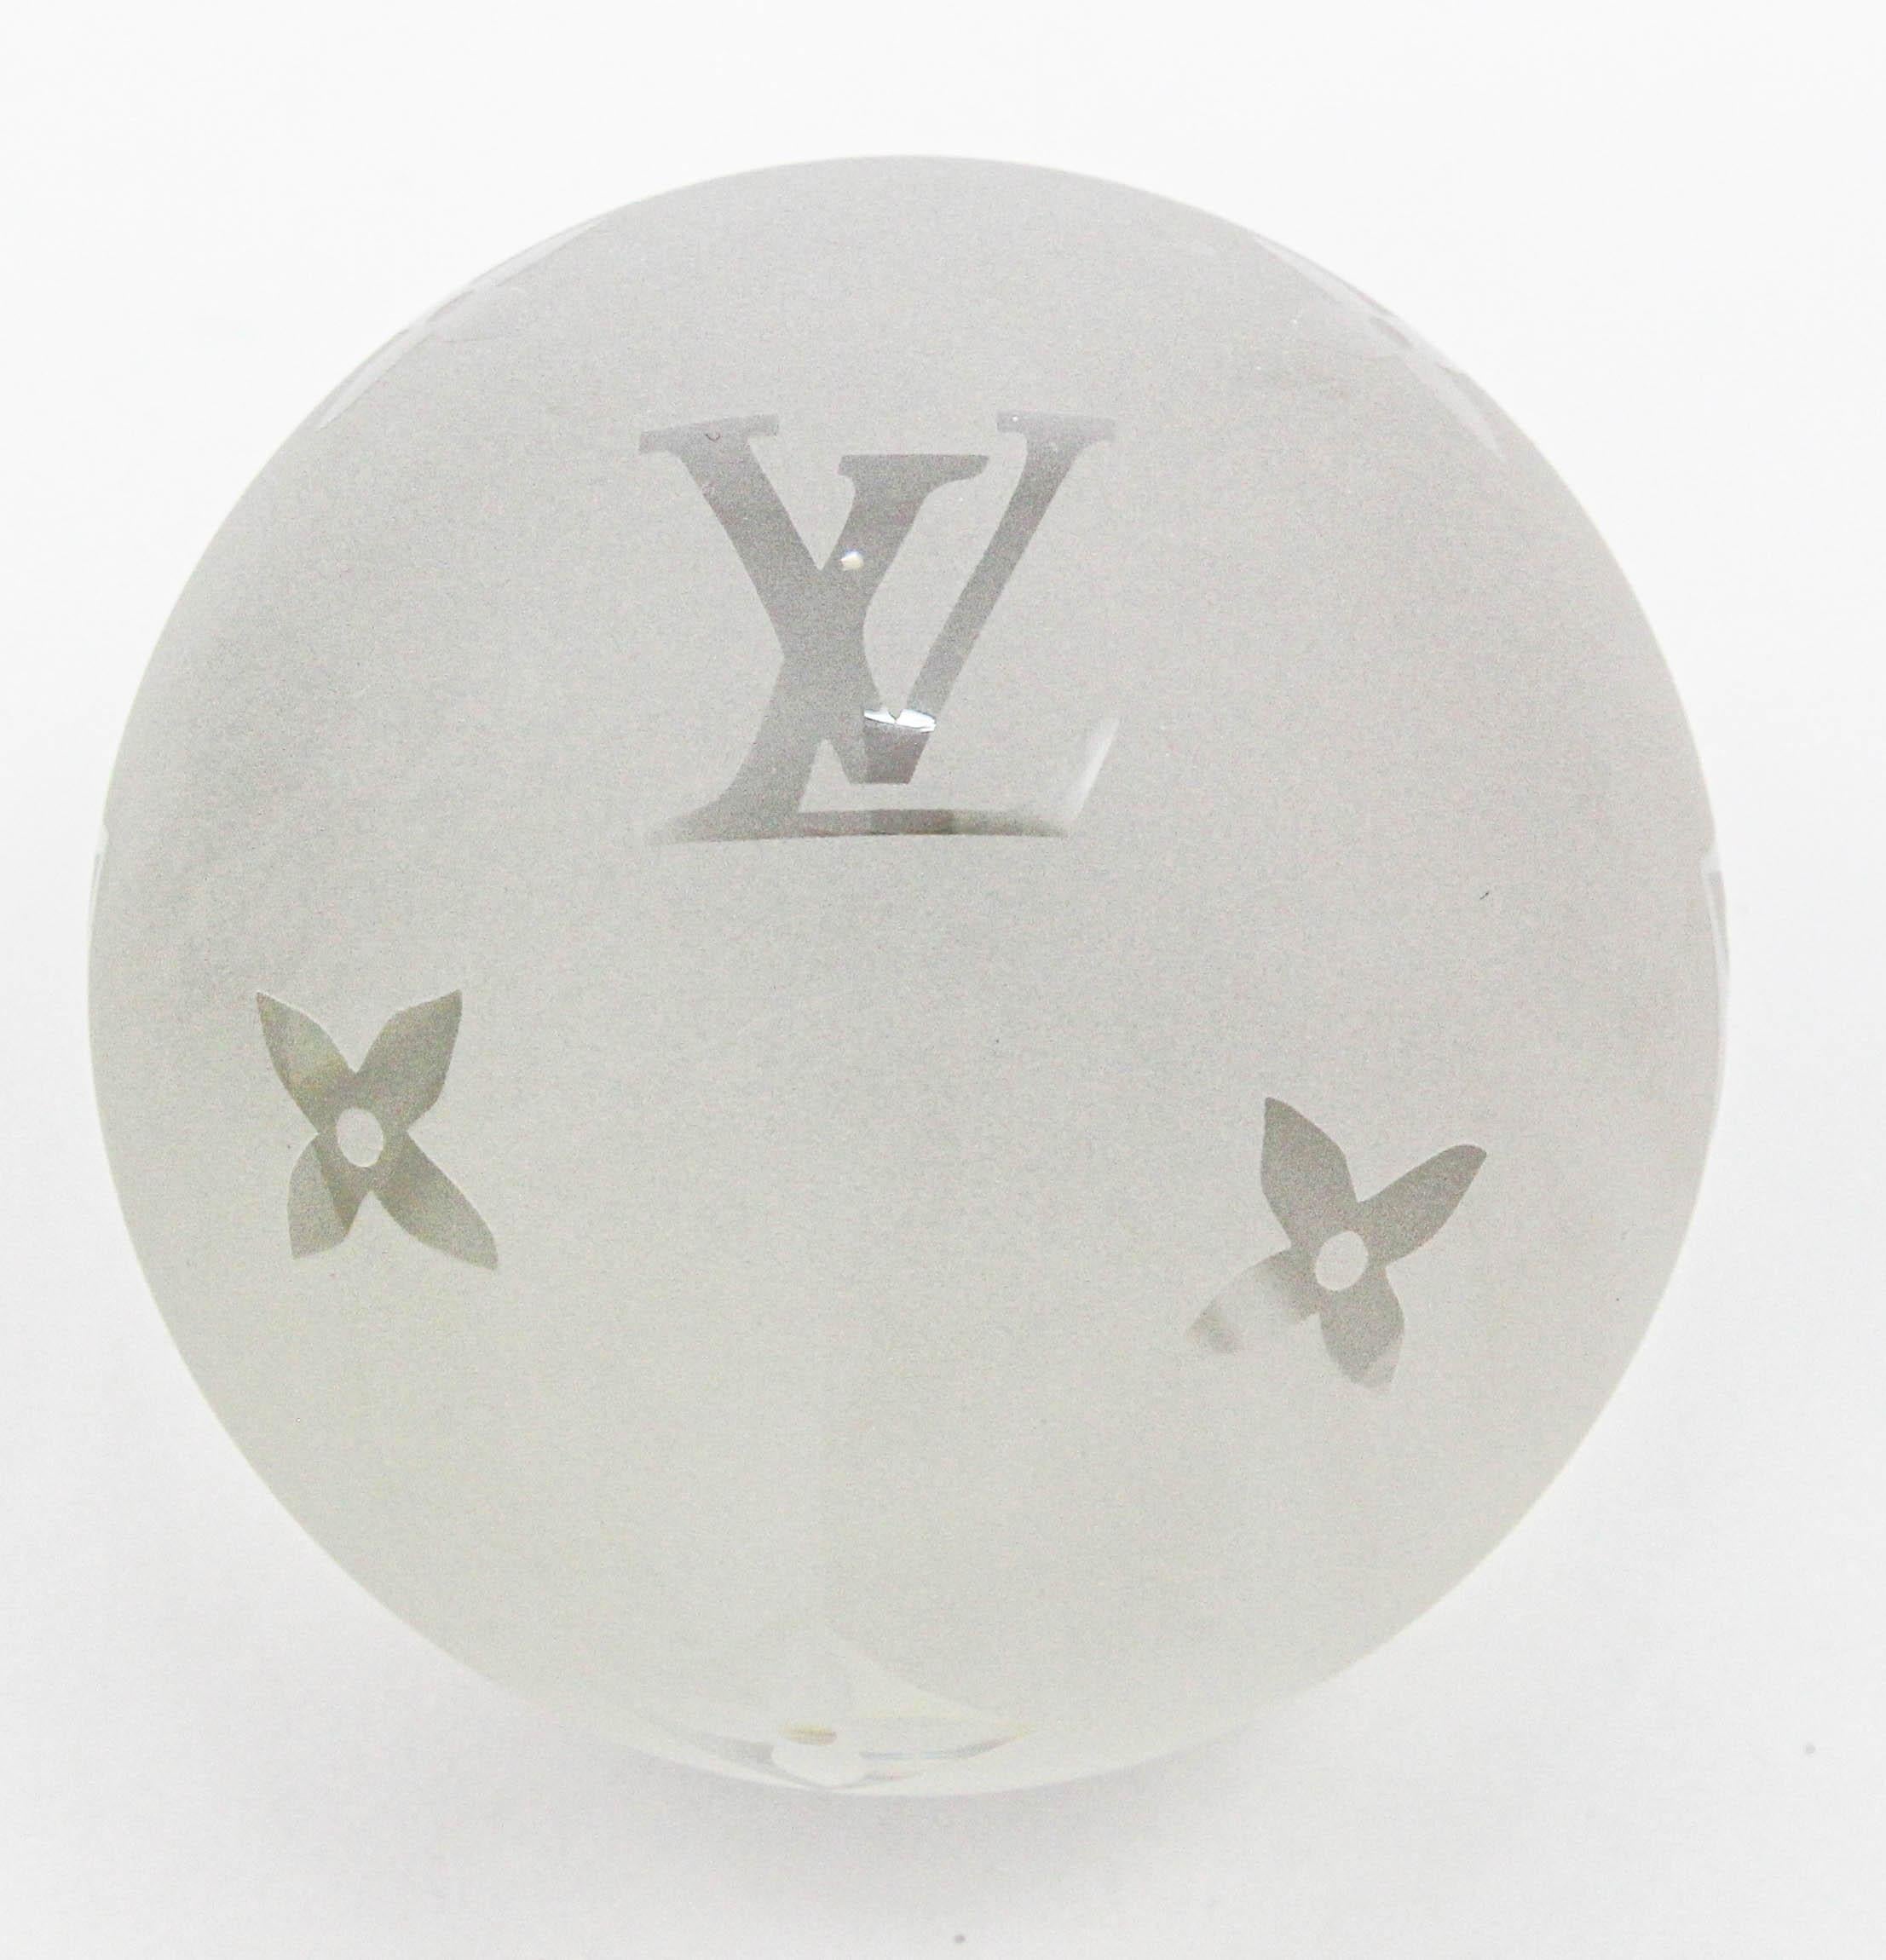 LOUIS VUITTON Paperweight Monogram Clear Crystal Paper Weight 2